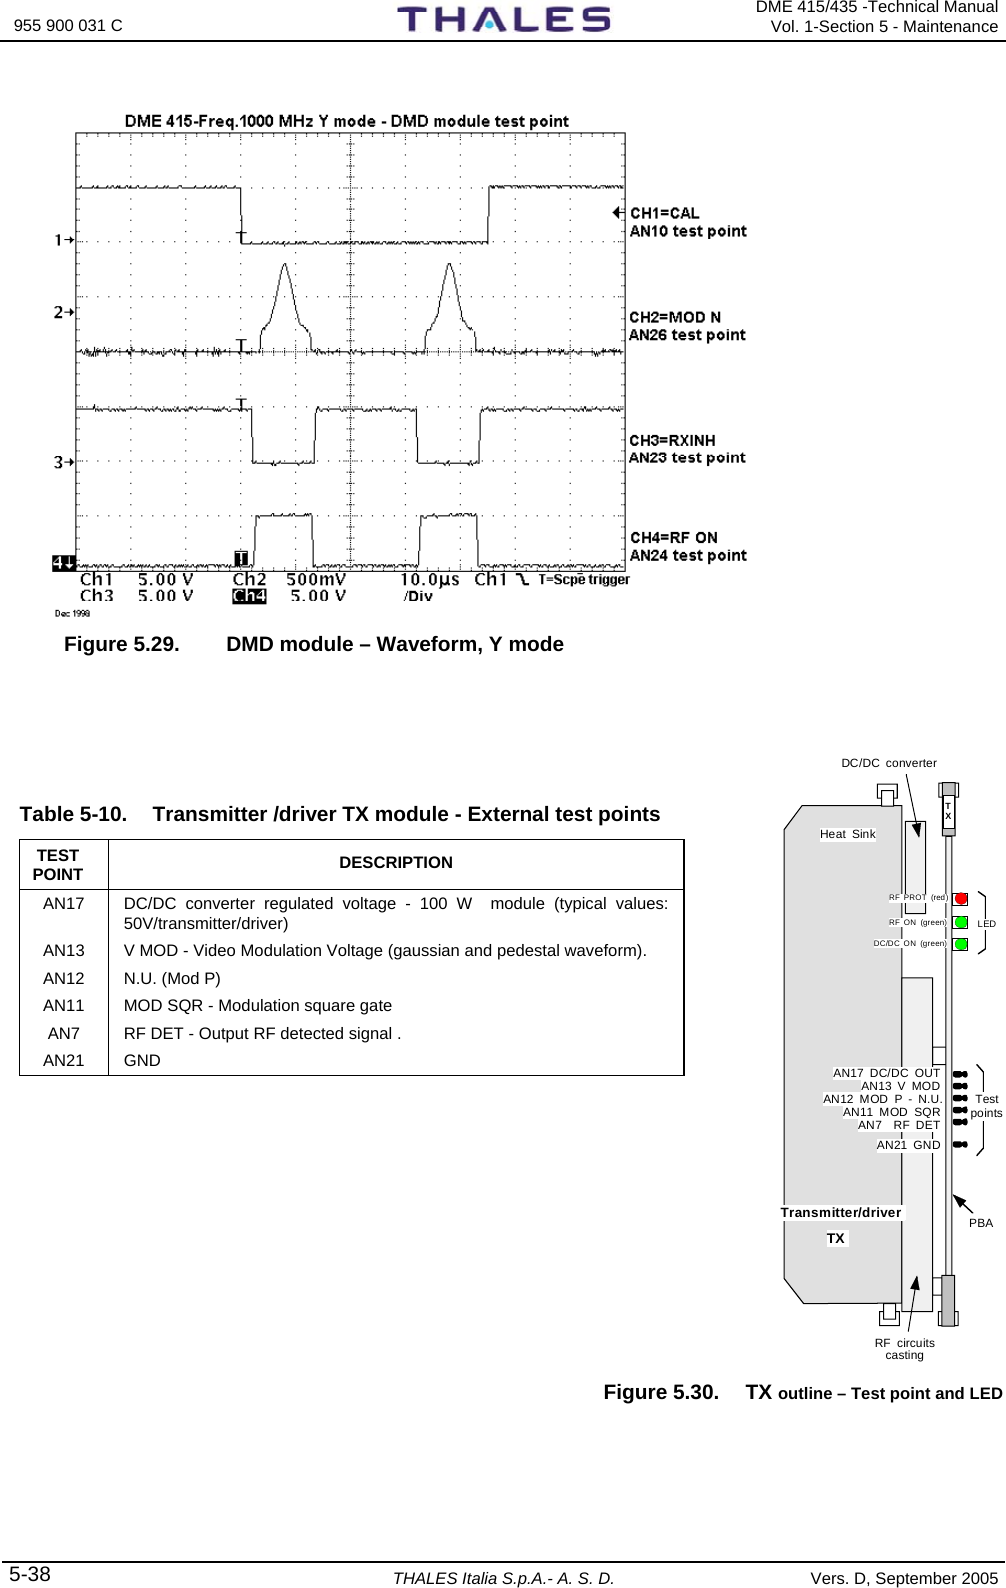  955 900 031 C   DME 415/435 -Technical ManualVol. 1-Section 5 - Maintenance 5-38 THALES Italia S.p.A.- A. S. D. Vers. D, September 2005  Figure 5.29.  DMD module – Waveform, Y mode     Table 5-10.  Transmitter /driver TX module - External test points  TEST POINT  DESCRIPTION AN17  DC/DC converter regulated voltage - 100 W  module (typical values: 50V/transmitter/driver)  AN13  V MOD - Video Modulation Voltage (gaussian and pedestal waveform). AN12  N.U. (Mod P)  AN11  MOD SQR - Modulation square gate  AN7  RF DET - Output RF detected signal . AN21 GND          Figure 5.30.  TX outline – Test point and LED TX AN21 GNDRF PROT (red)RF ON (green)DC/DC ON (green)AN17 DC/DC OUTAN13 V MODAN12 MOD P - N.U.AN11 MOD SQRAN7  RF DETTXDC/DC converterHeat SinkRF circuitscasting PBATest pointsLEDTransmitter/driver 